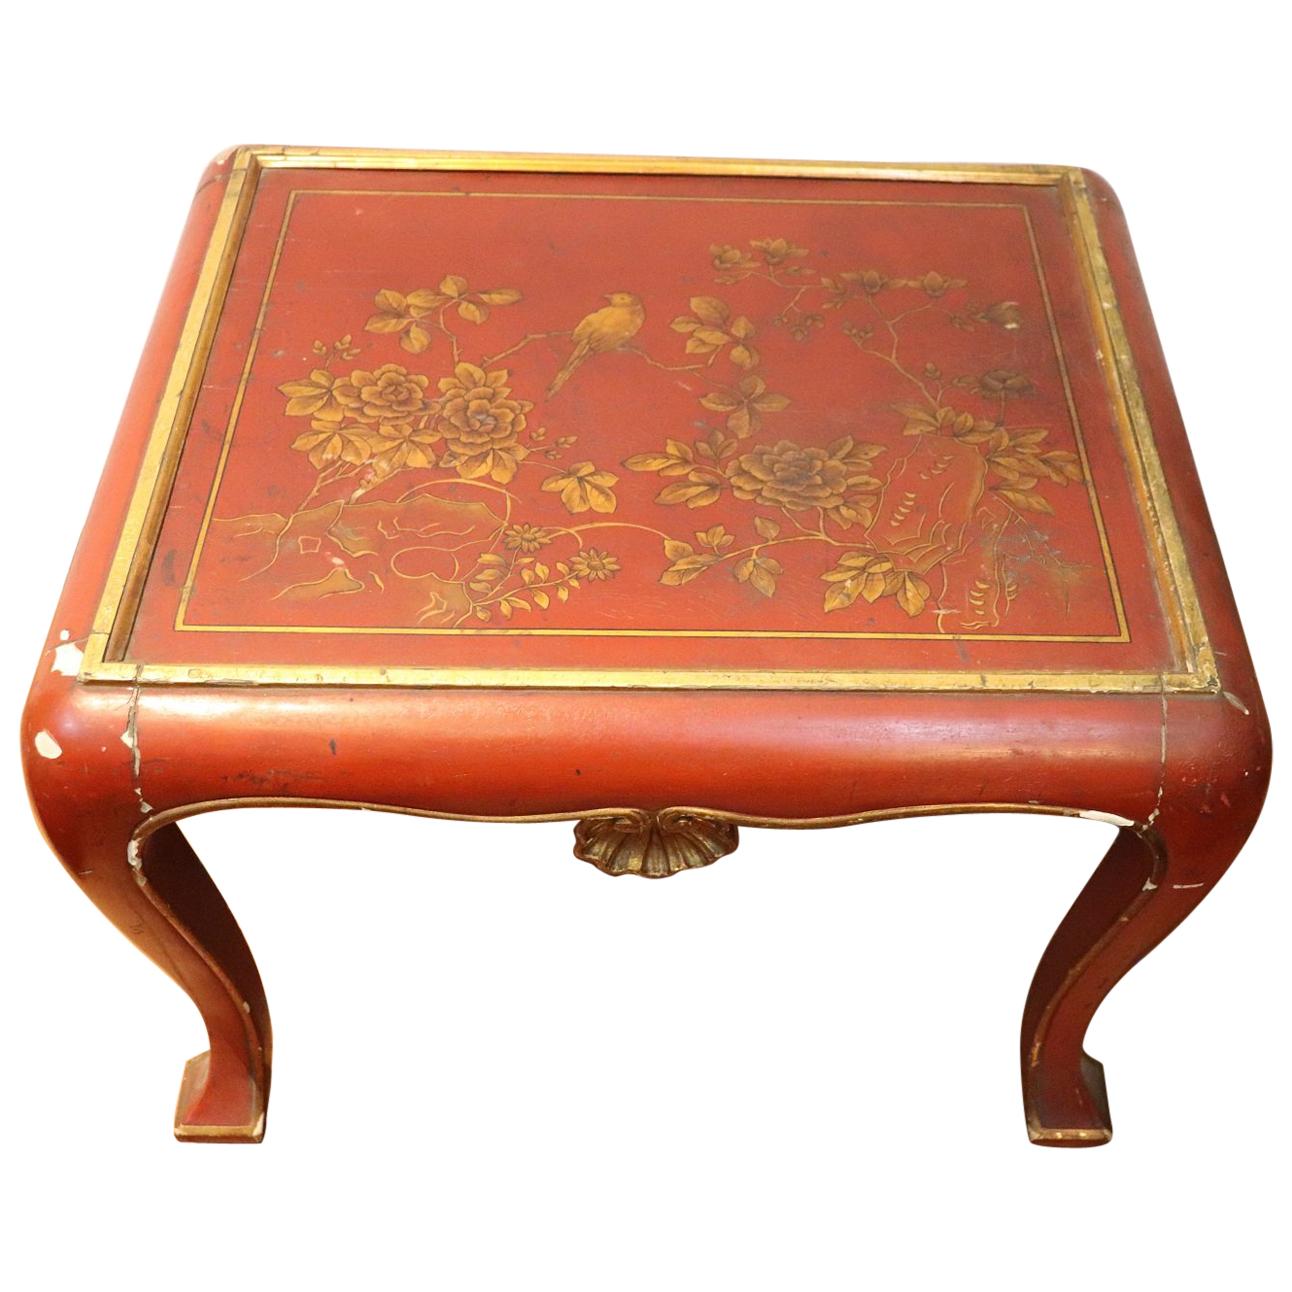 20th Century Lacquered and Painted Wood Japanese Side Table or Sofa Table